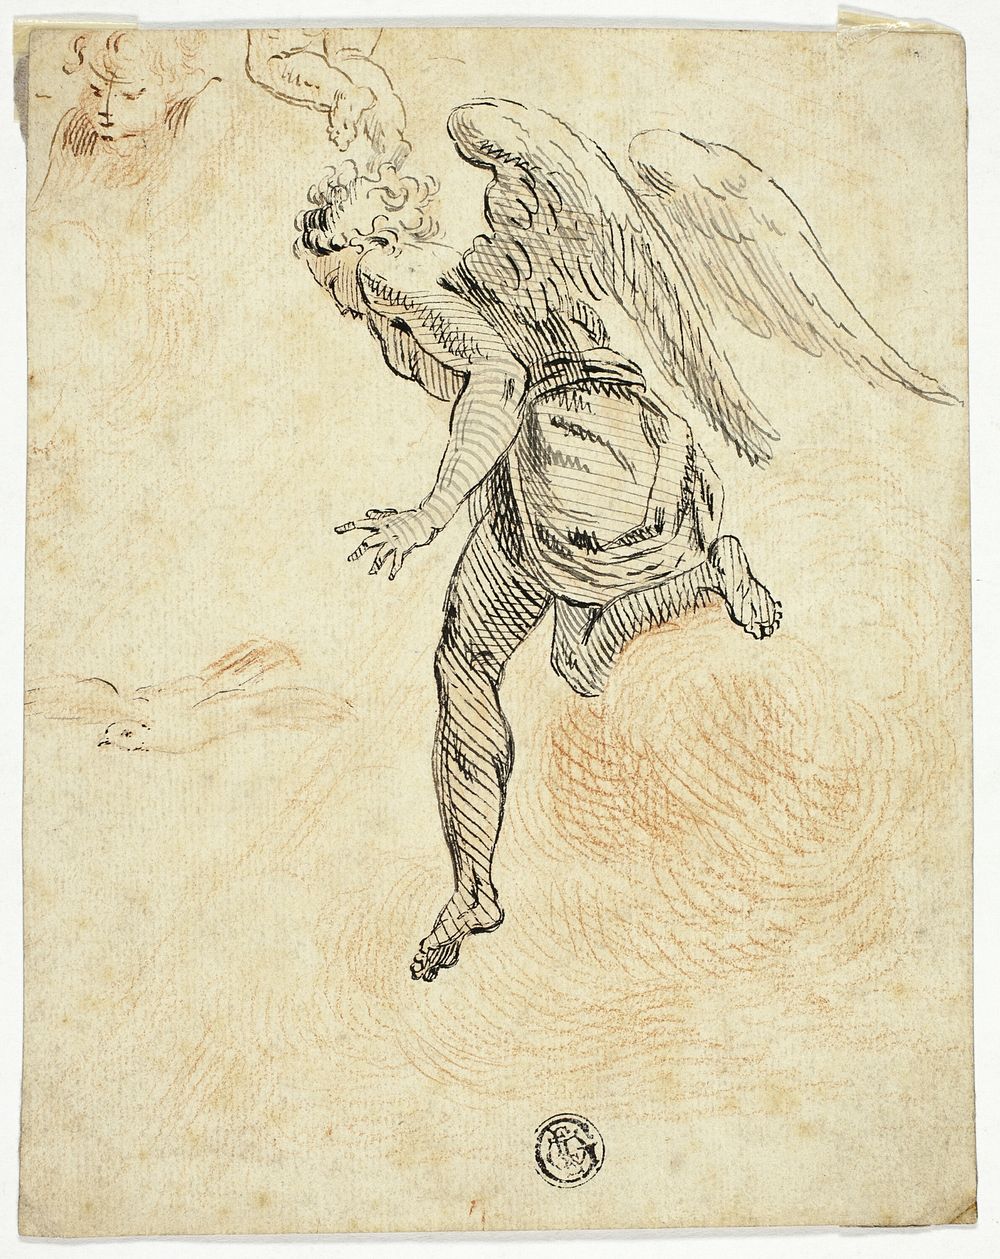 Flying Angel with Sketches of Dove and Putto's Head by Follower of Donato Creti